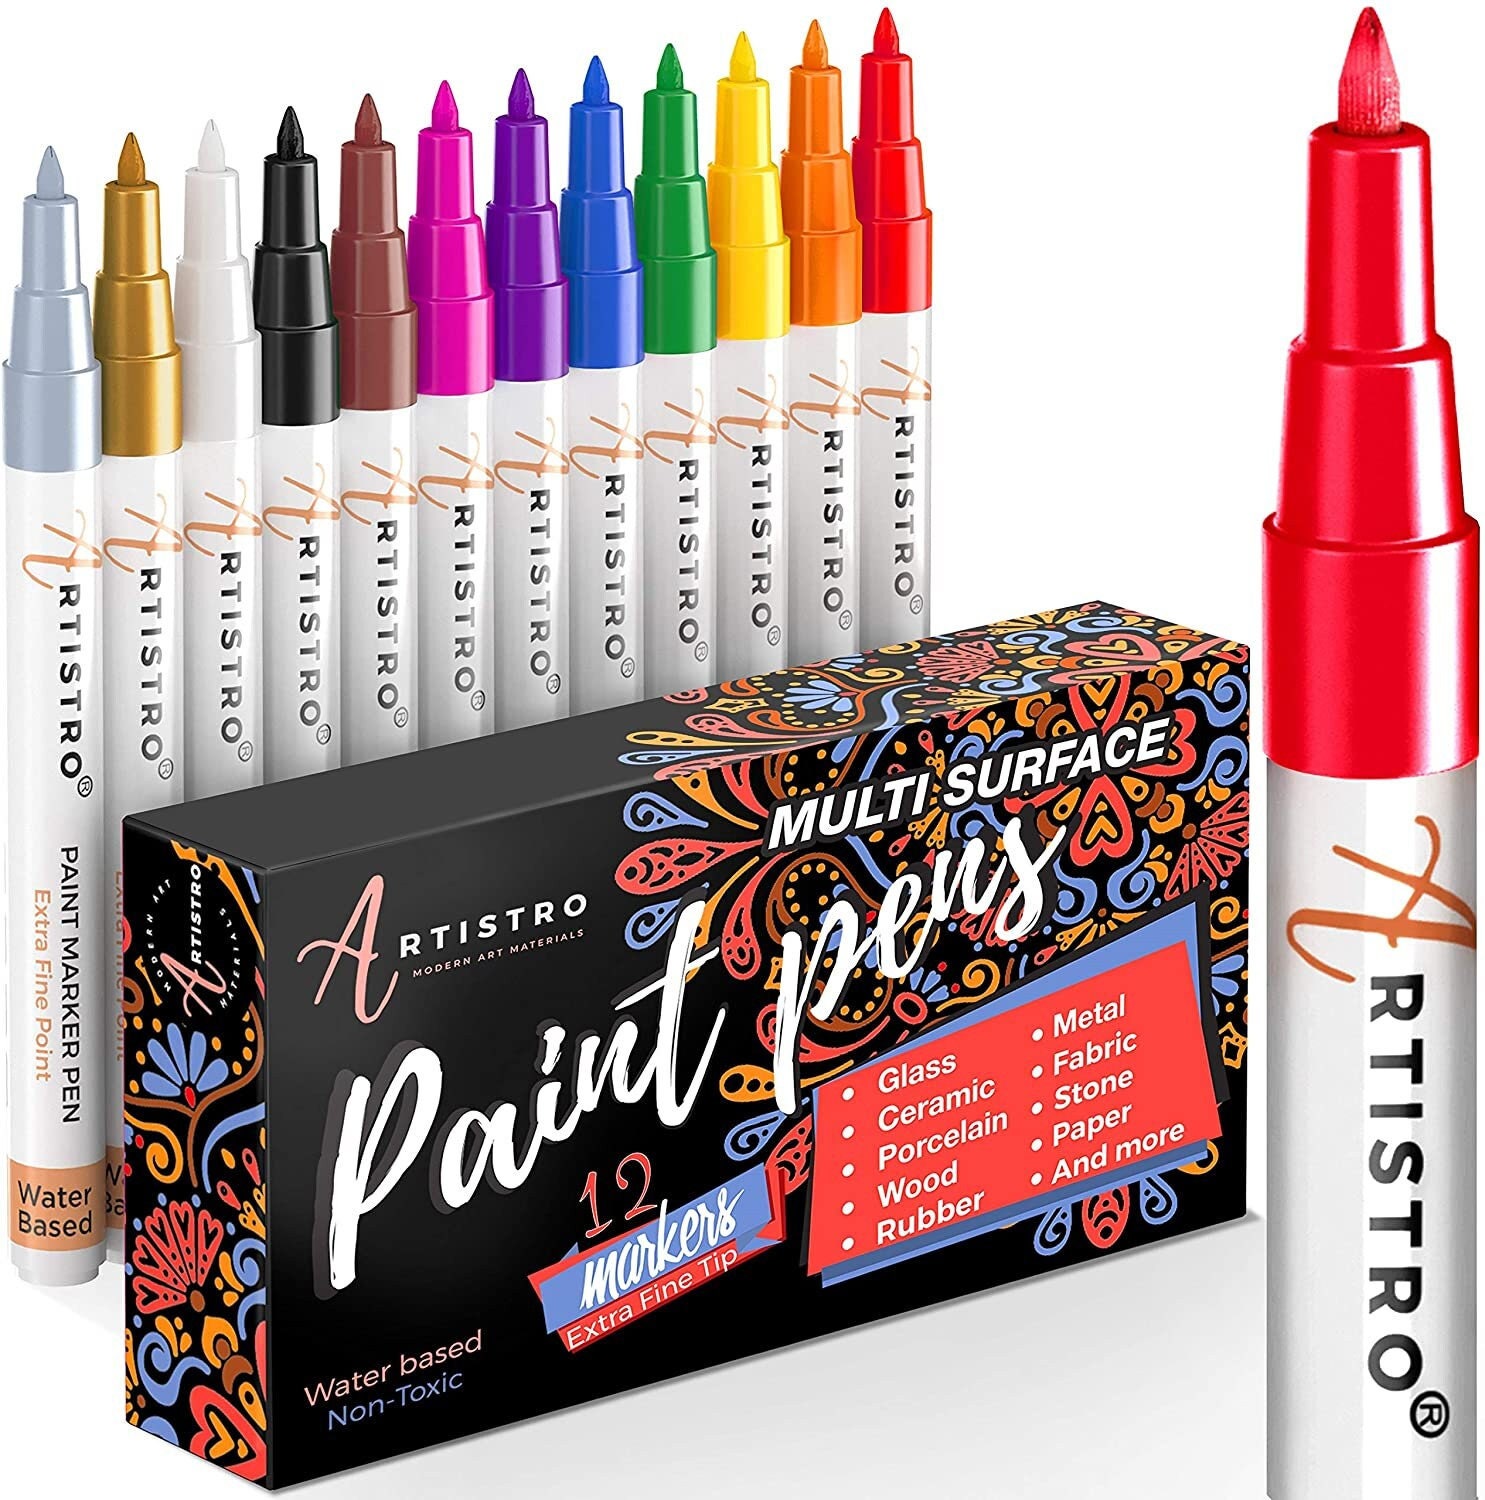 Crayola Adult Coloring Fine Line Markers Contemporary 12 count